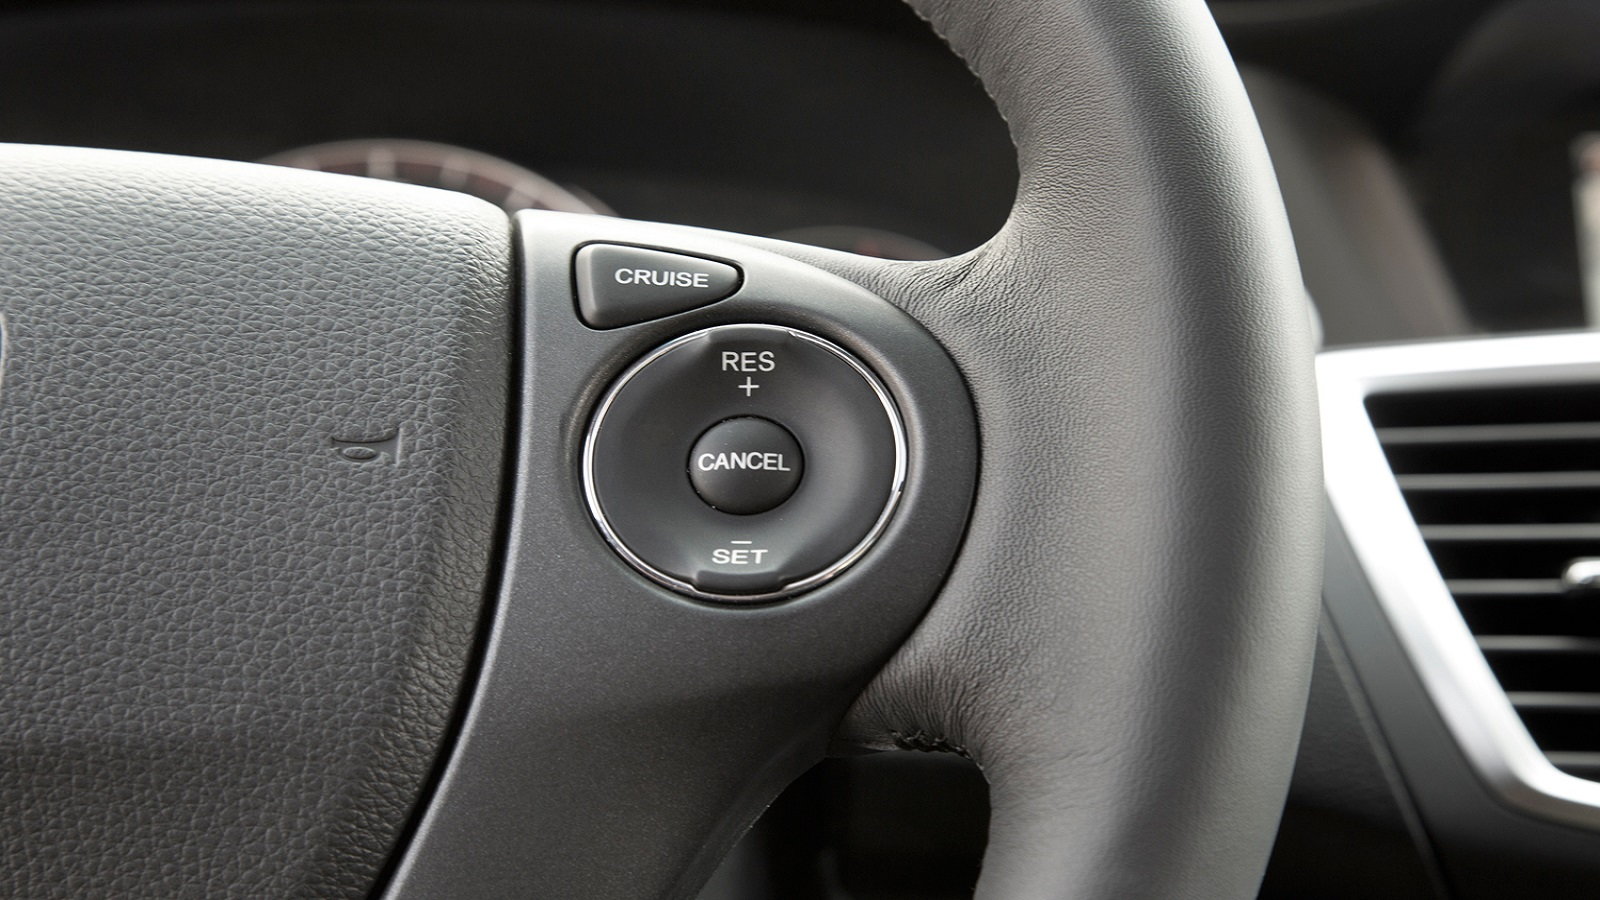 Honda Civic: Why is My Cruise Control Not Working? | Honda-tech 2003 Honda Element Cruise Control Not Working